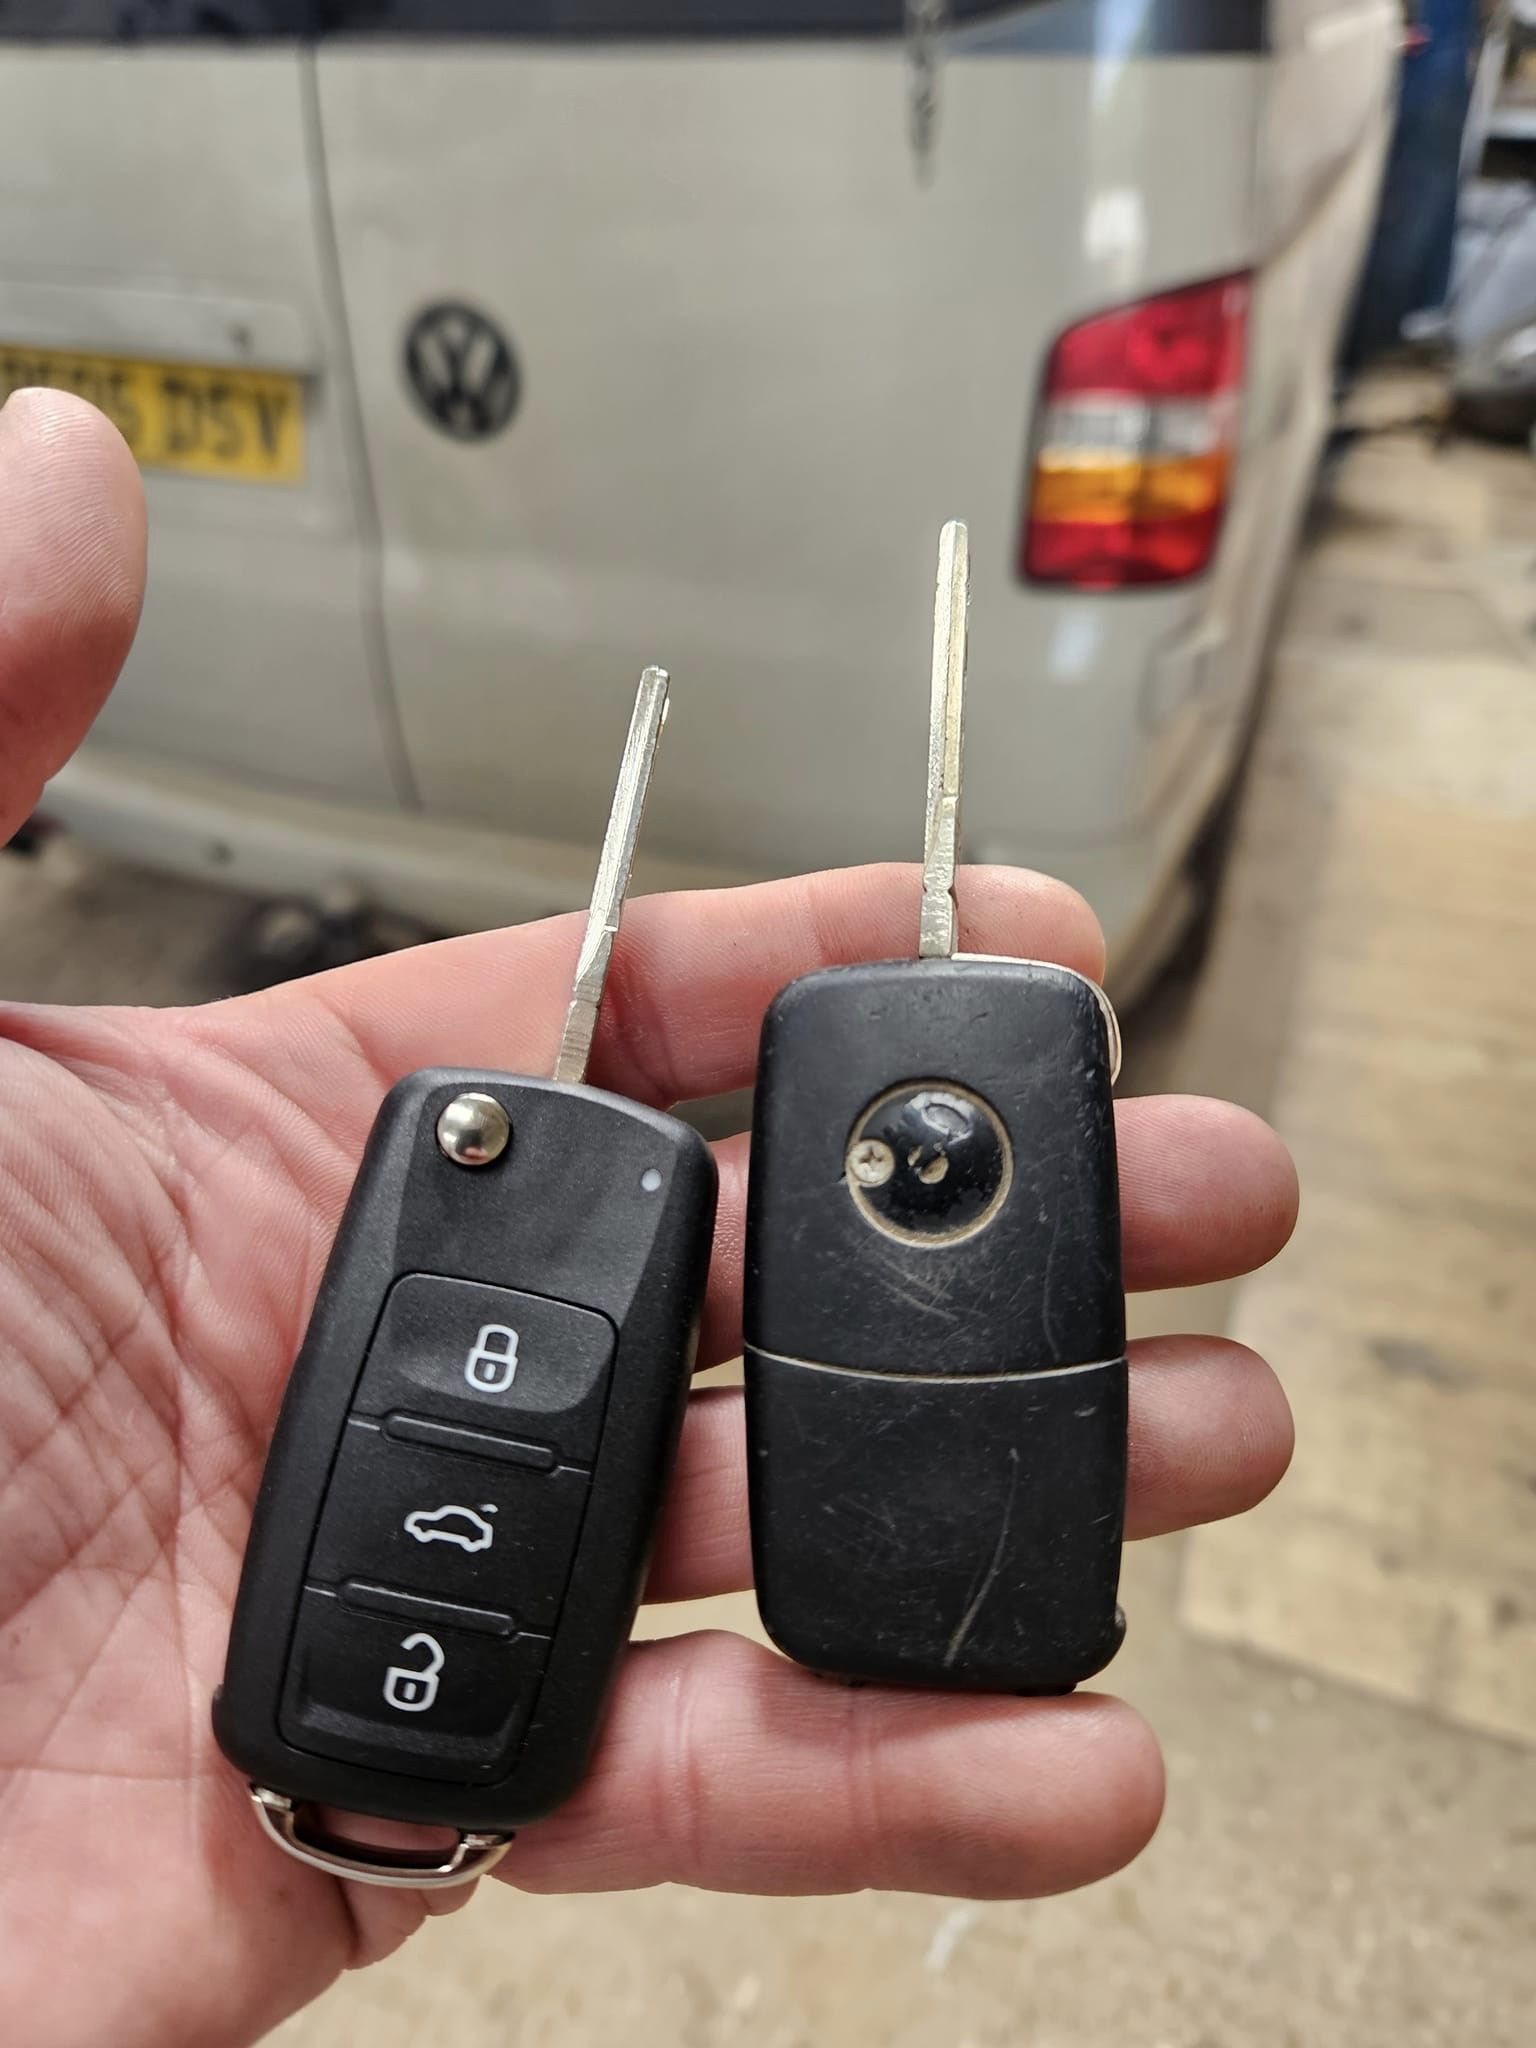 Man holding a new and old key fob for vw van